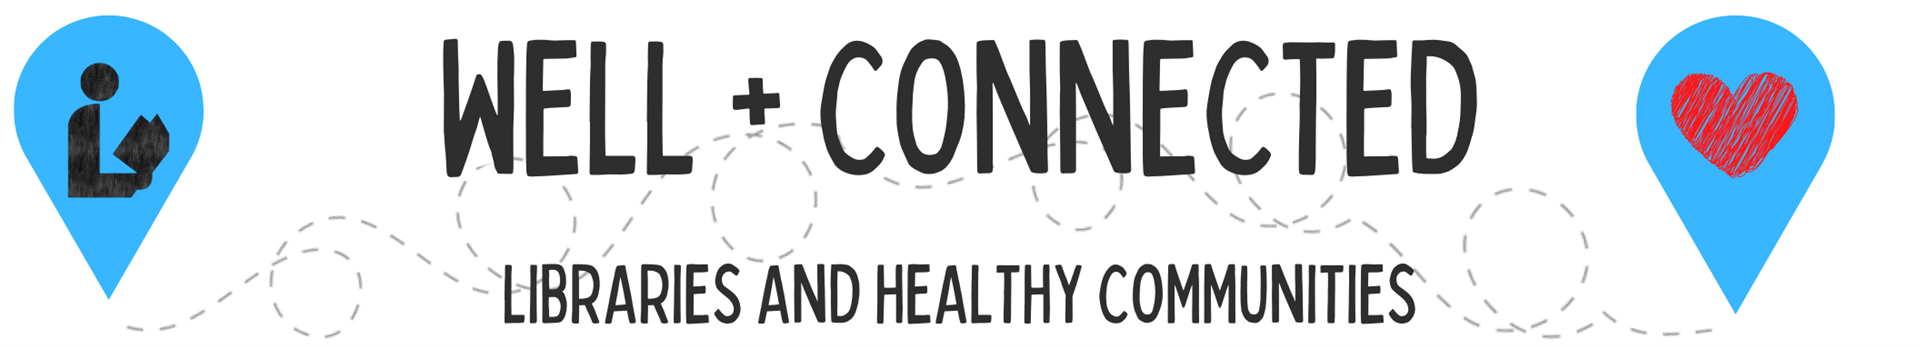 Well + Connected: Libraries and Healthy Communities